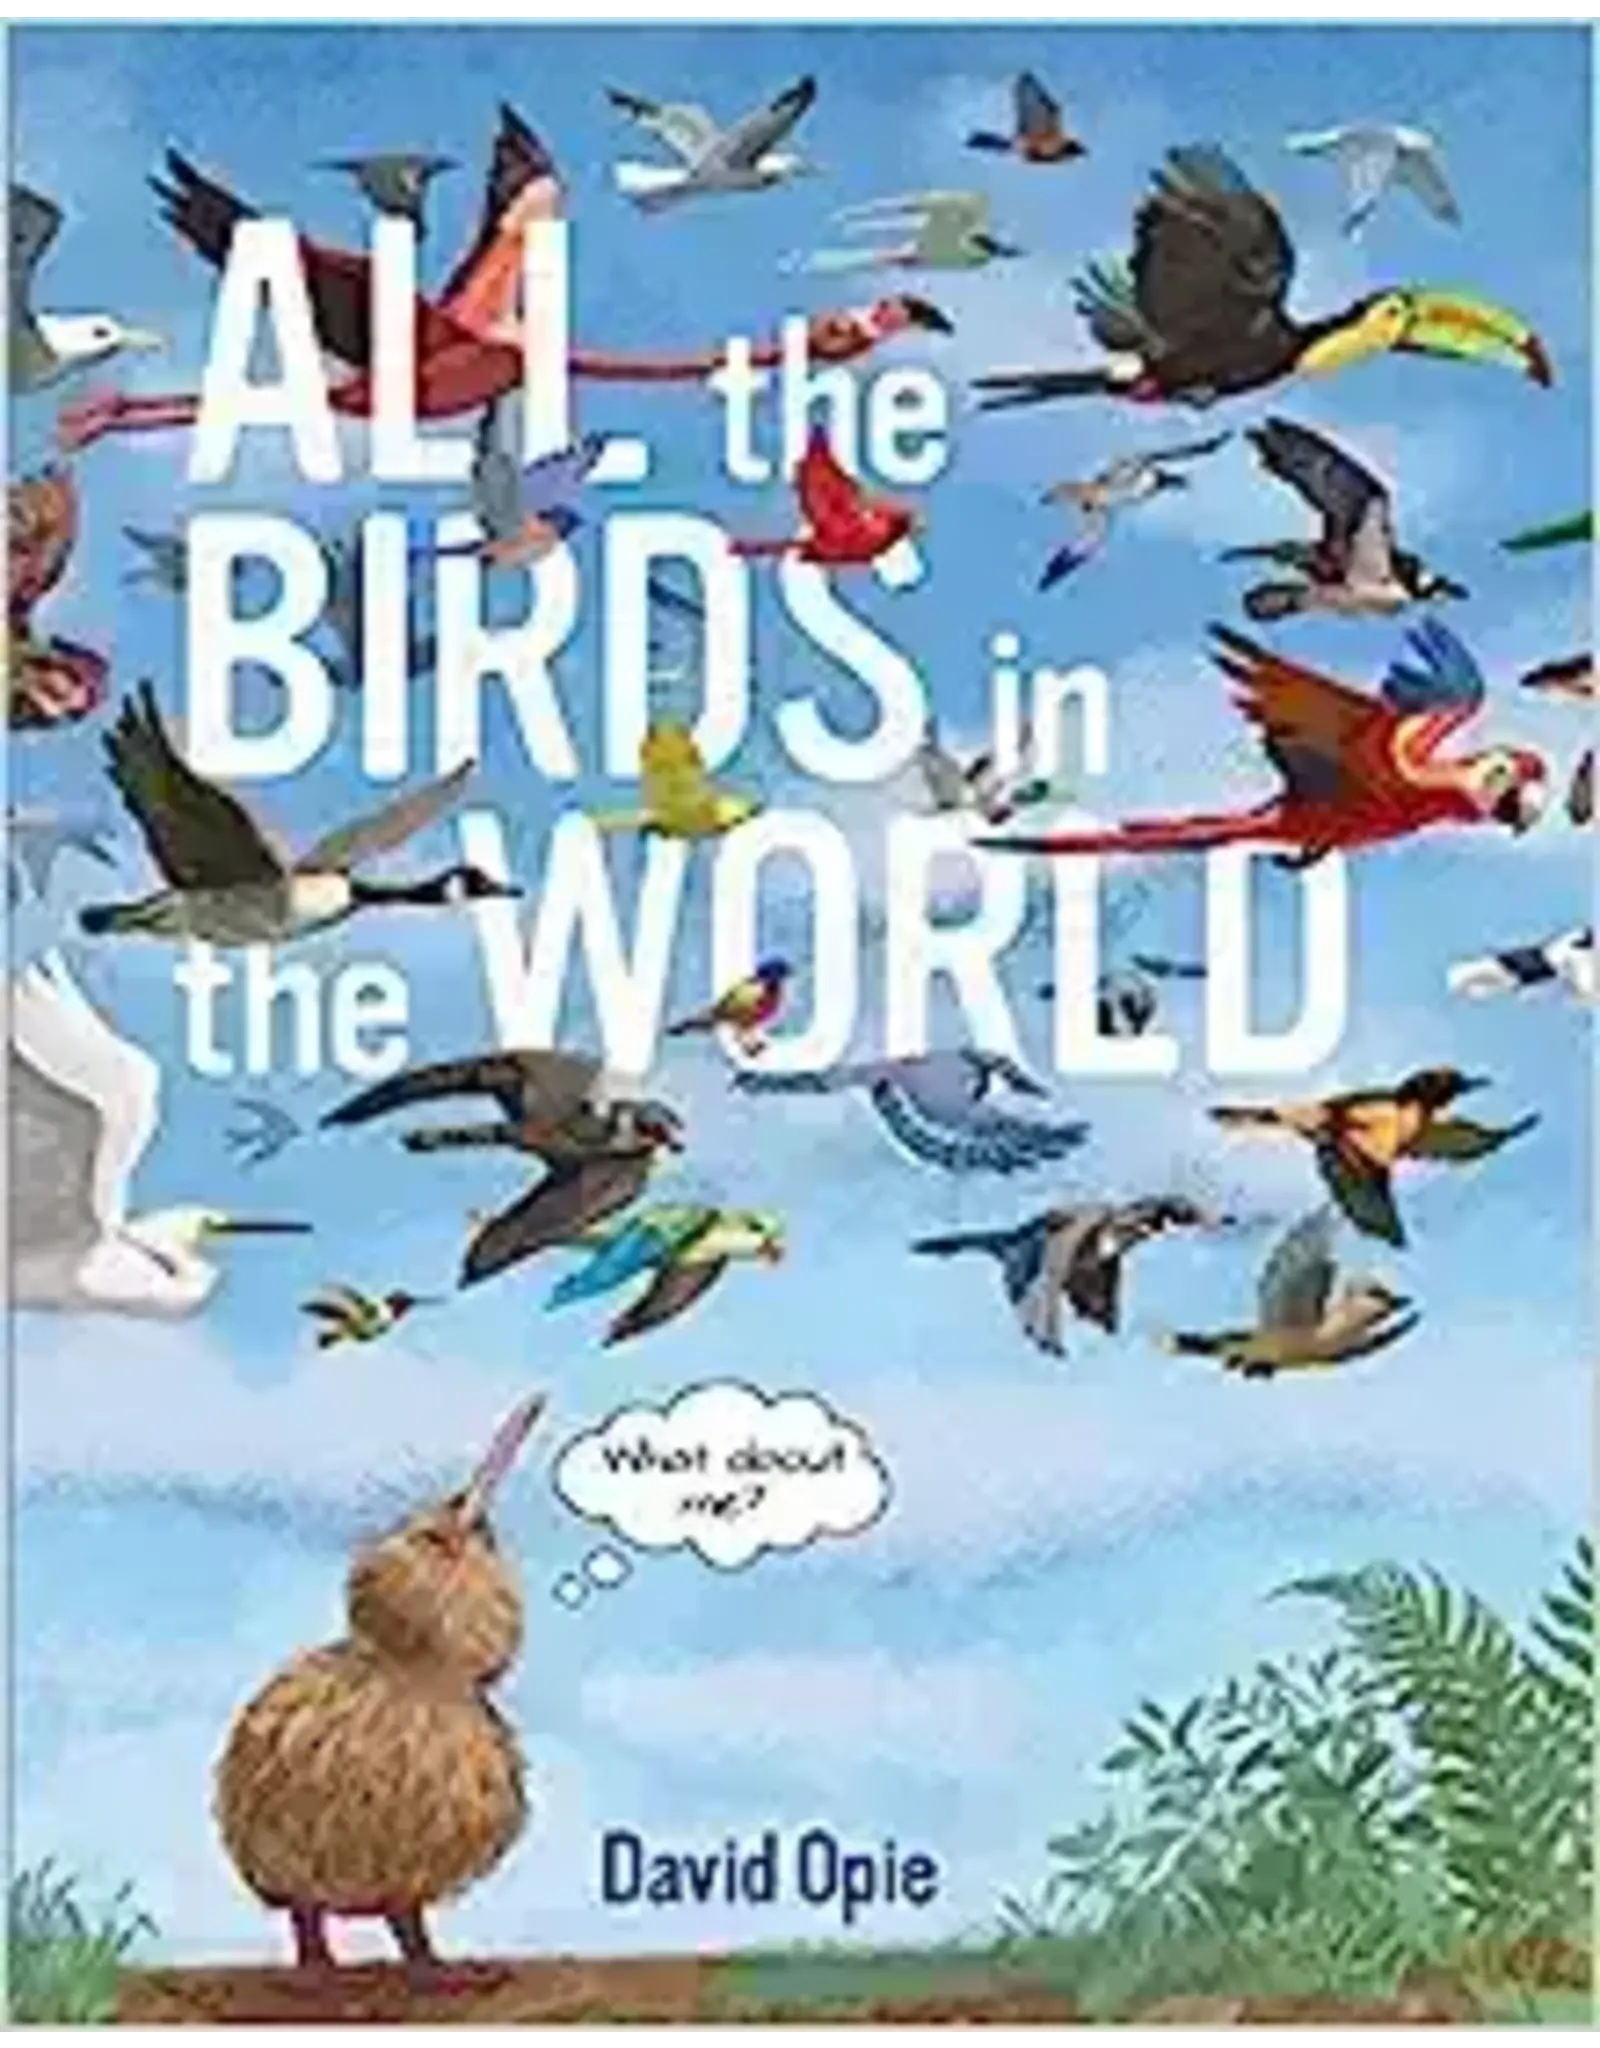 Peter Pauper Press All the Birds in the World